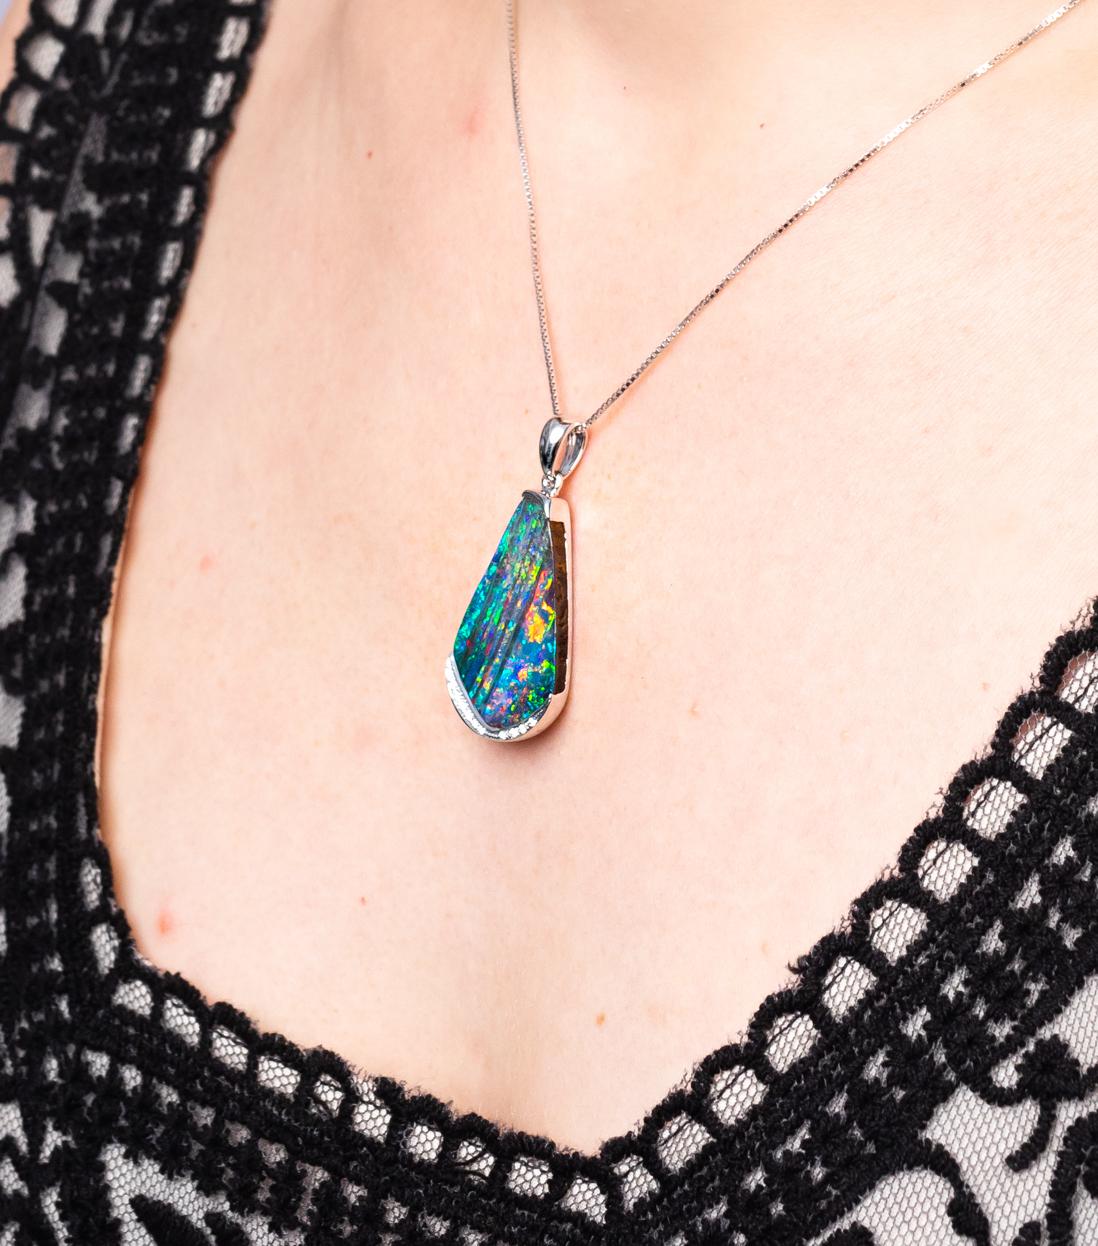 Beguiling and colourful, “Deseo” opal pendant enthrals with its colour-play. This 14.22 carat boulder opal from Winton displays a rare and prized panther pattern. The 18K pure white gold setting and flash of diamonds set off this splendid opal. Un